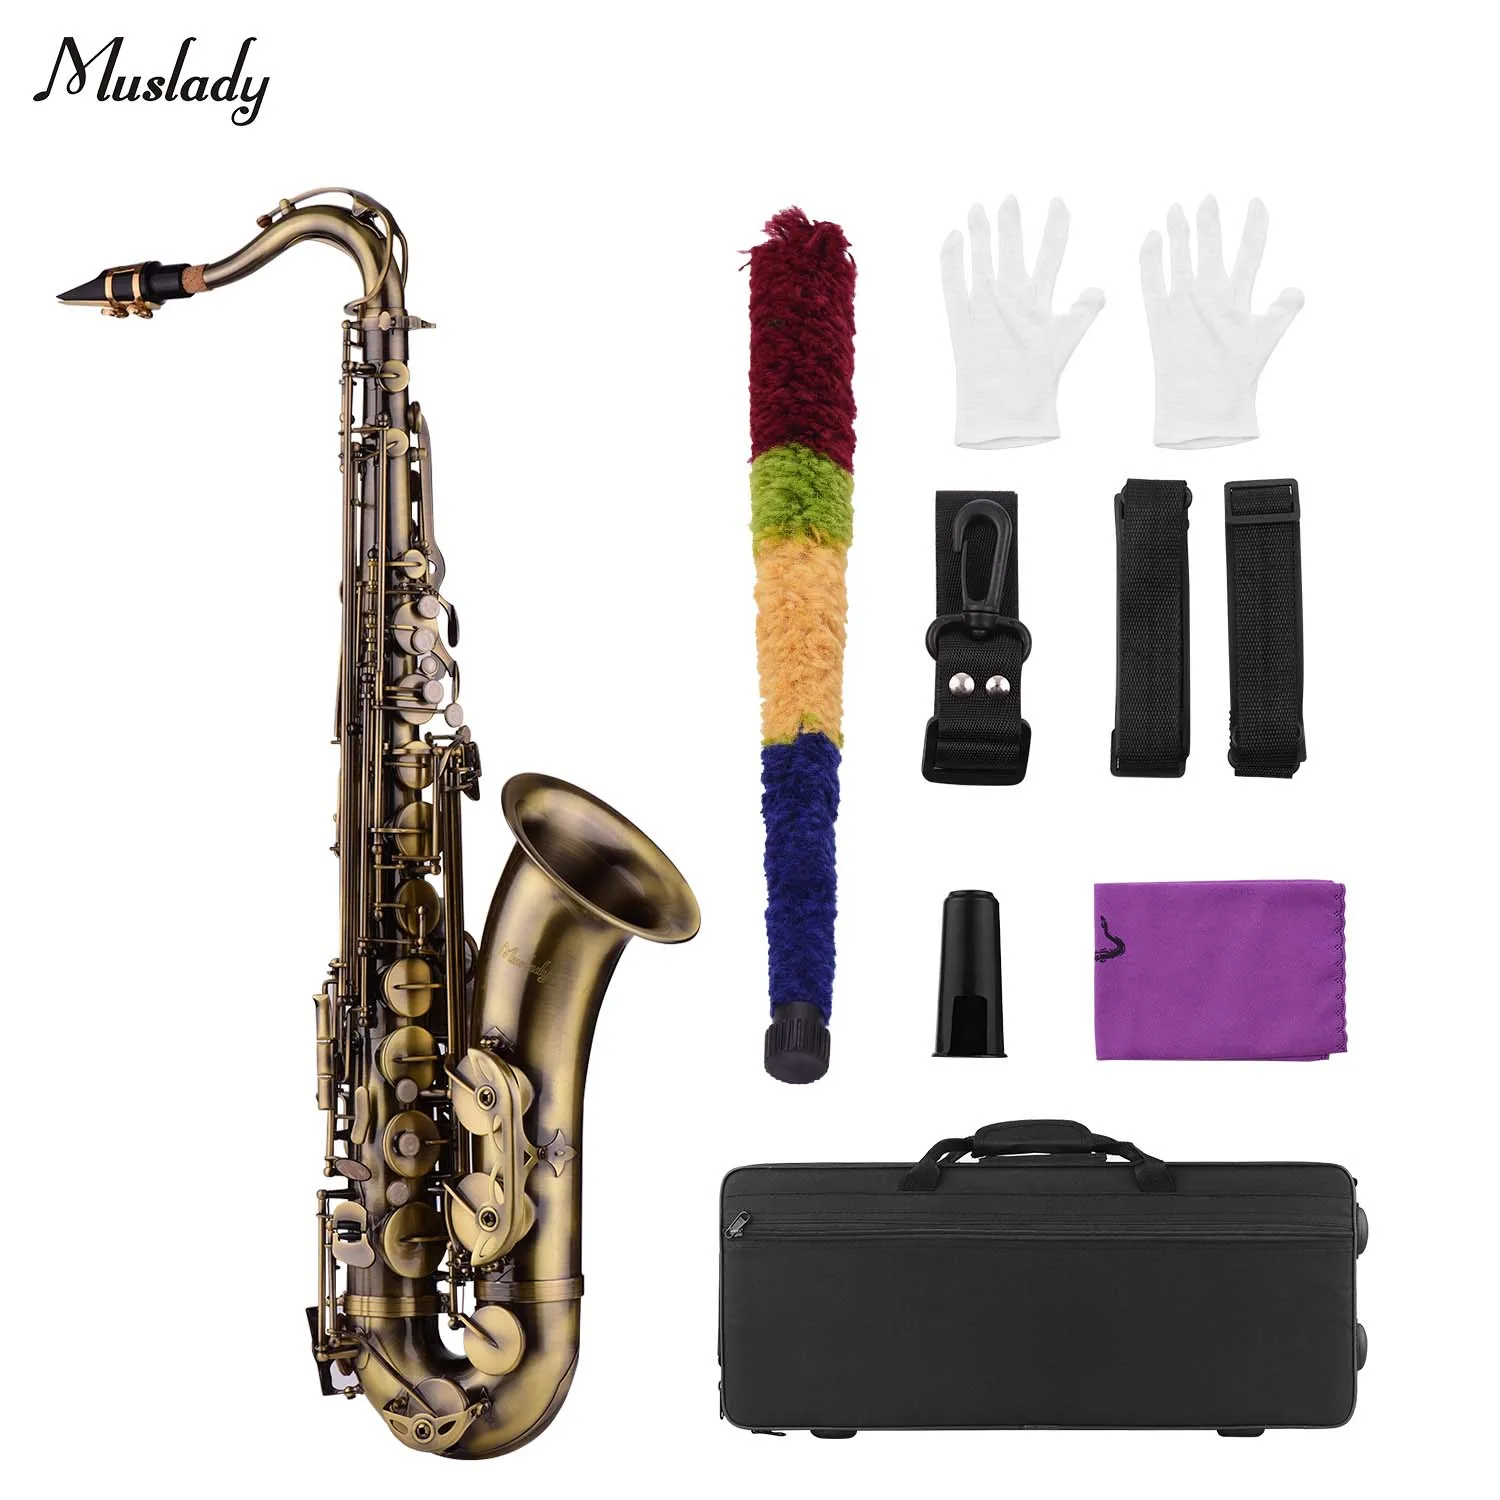 

Muslady Antique Finish Bb Tenor Saxophone Sax Brass Body White Shell Keys Woodwind Instrument with Carry Case Sax Neck Straps